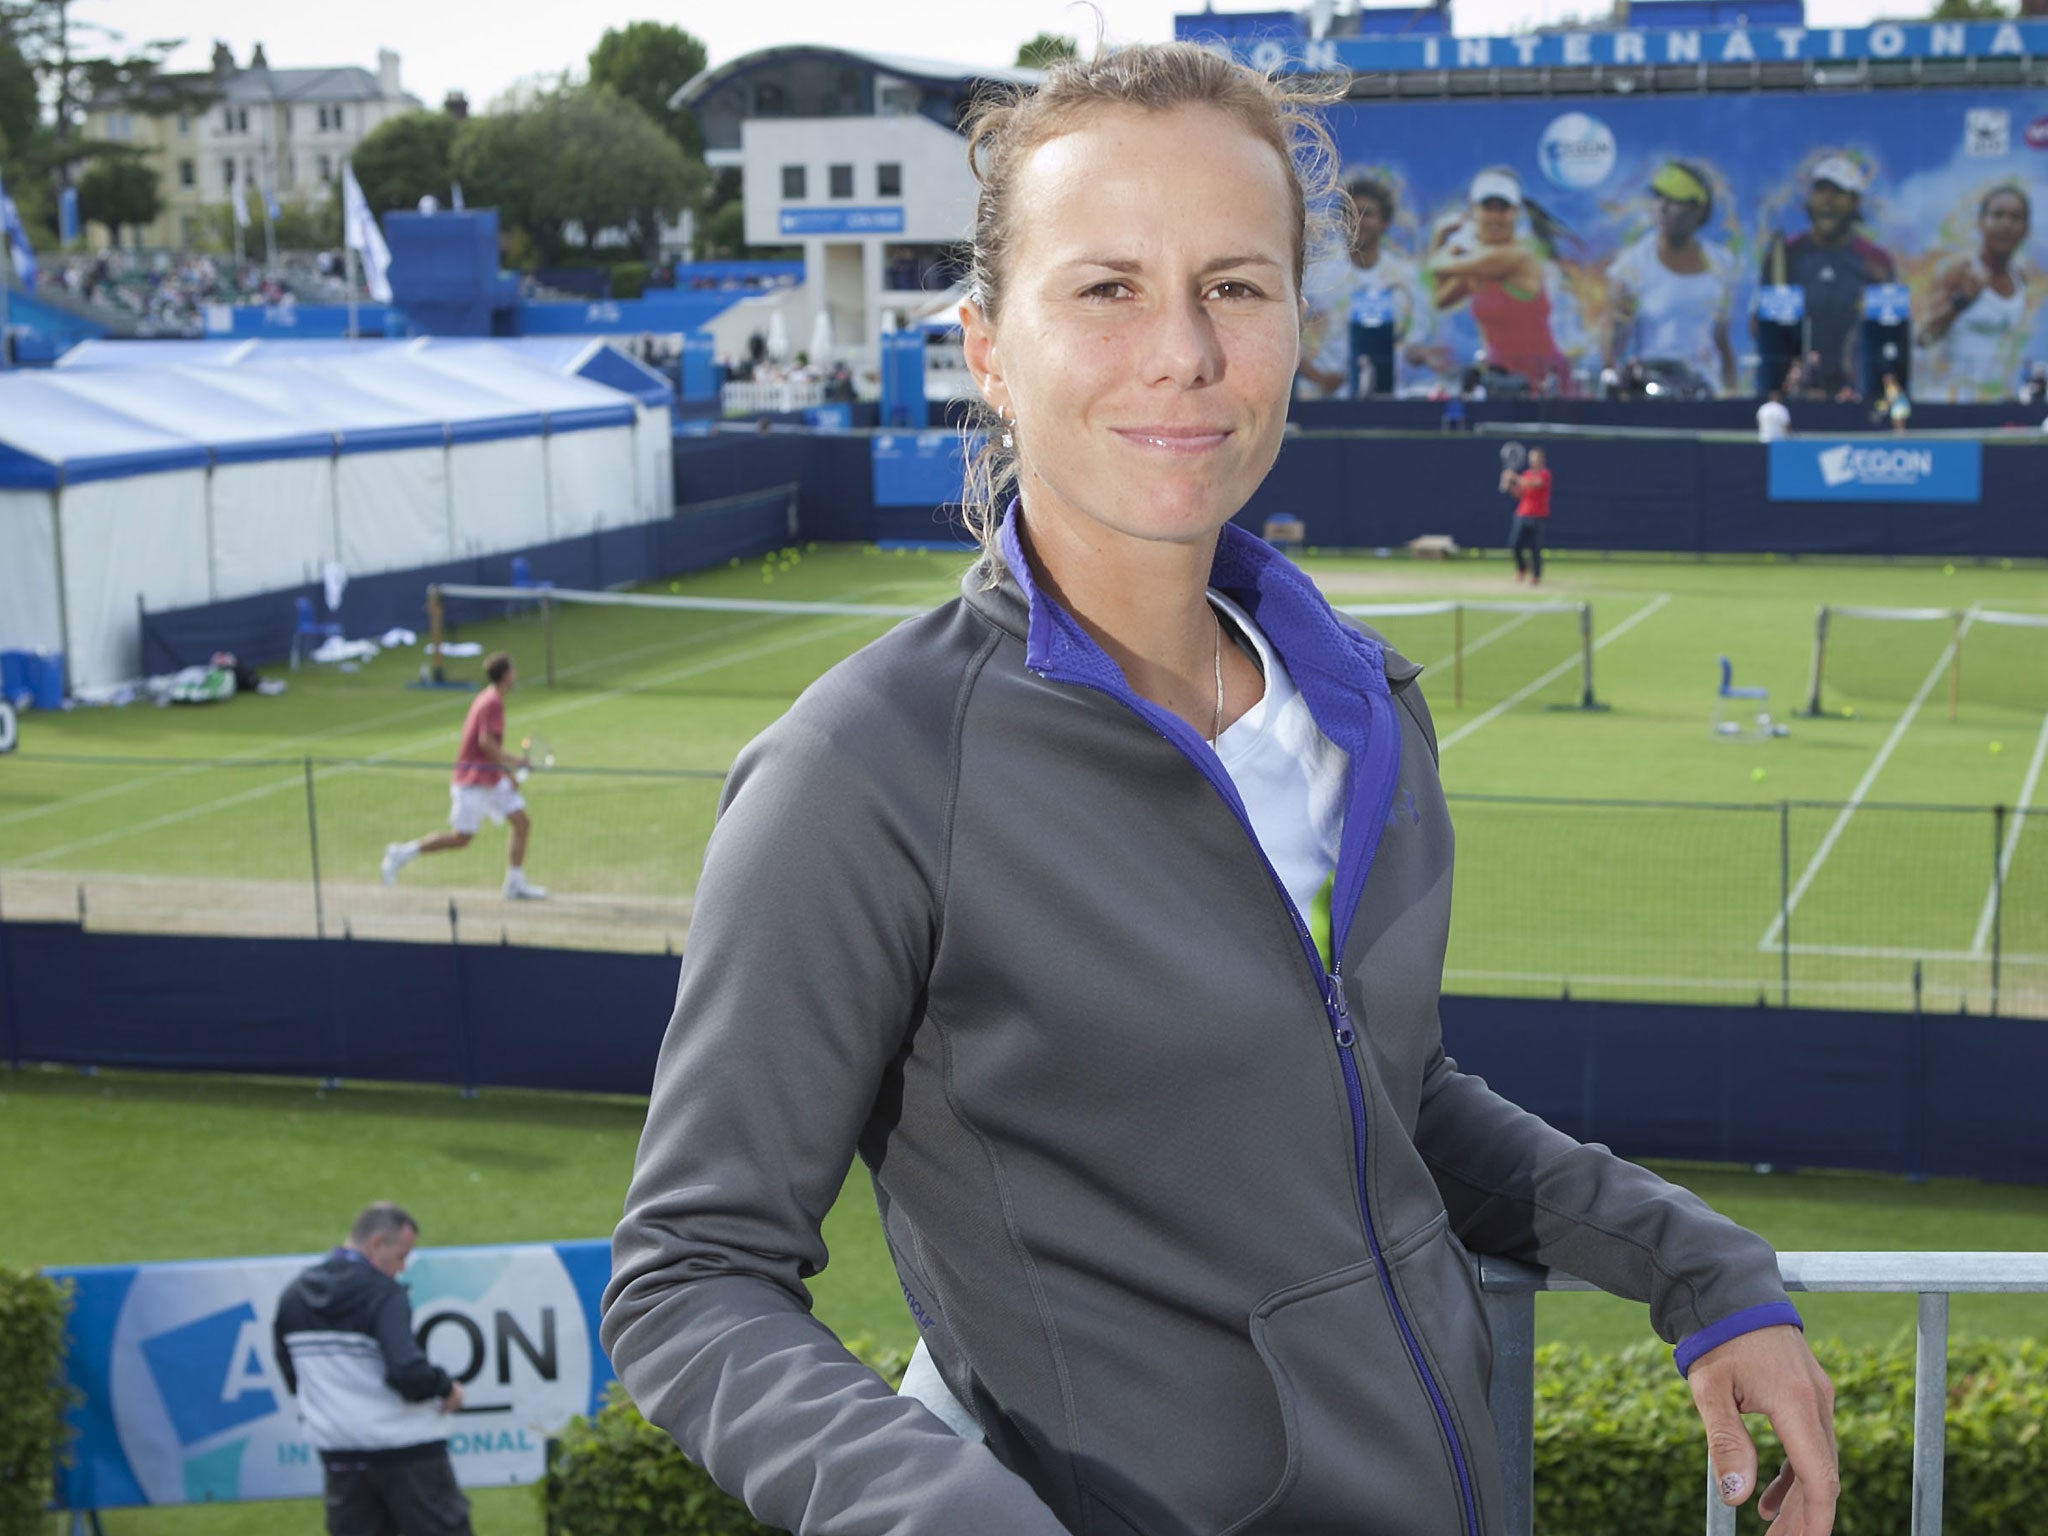 East to west Lepchenko, who played at Eastbourne last week, is hoping to make an impact at Wimbledon